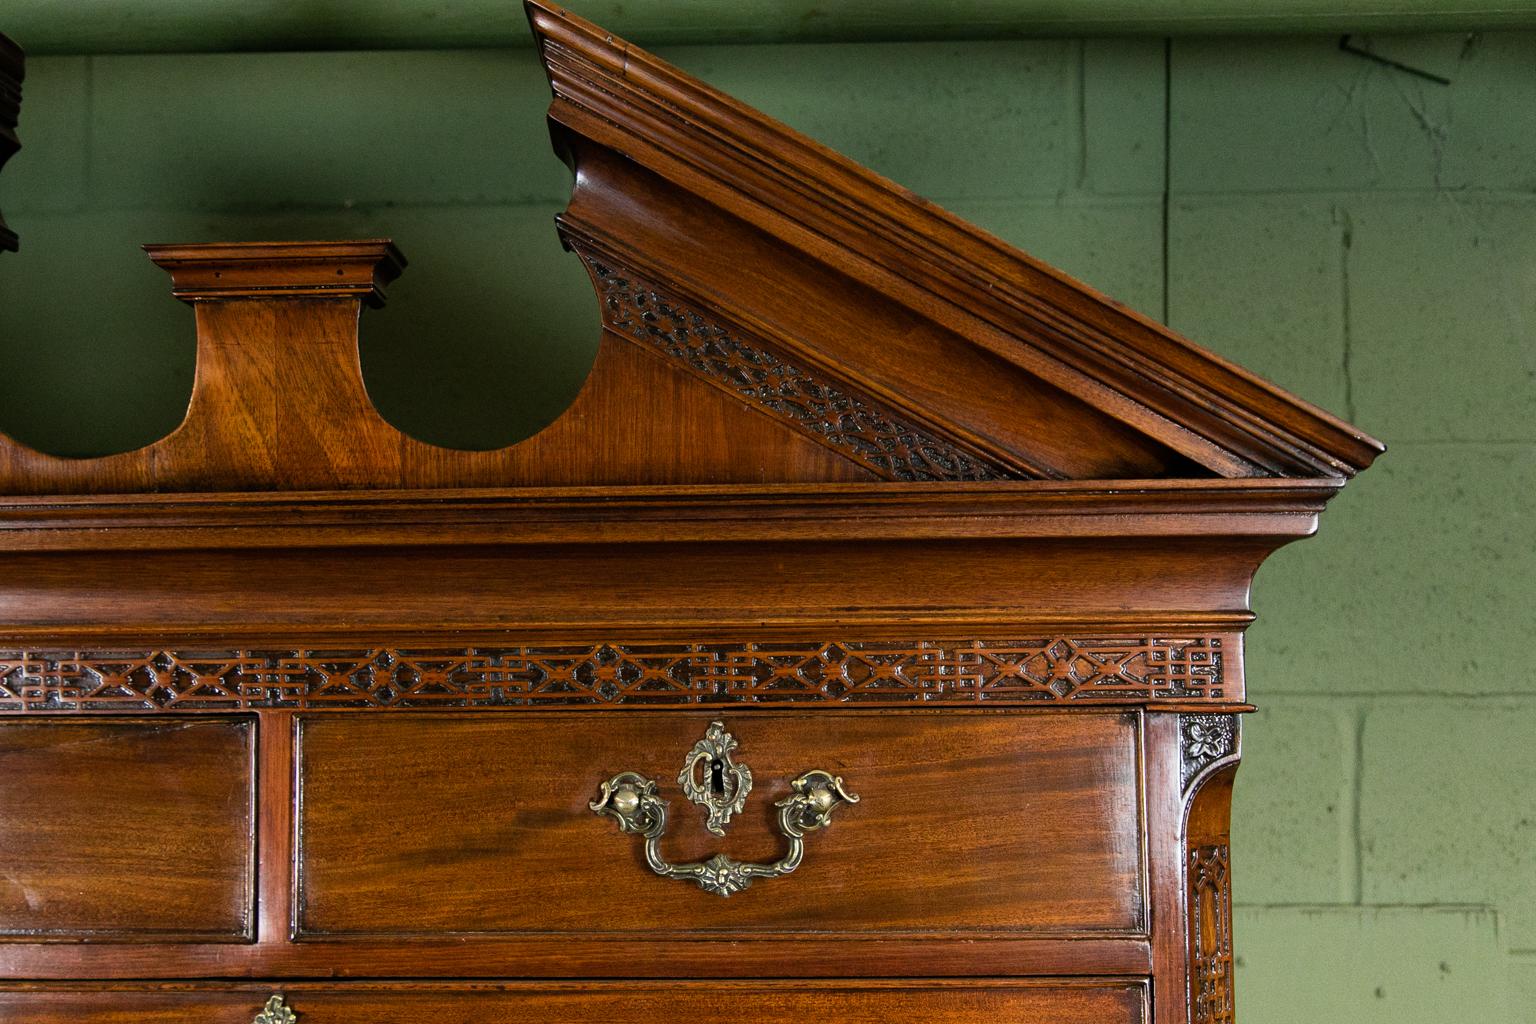 English mahogany Chippendale chest on chest has the original Rococo hardware. It has Fine fretwork in the frieze and the broken arch pediment. The blind fretwork extends to the sides and on the base of the upper section. The chamfered corners also